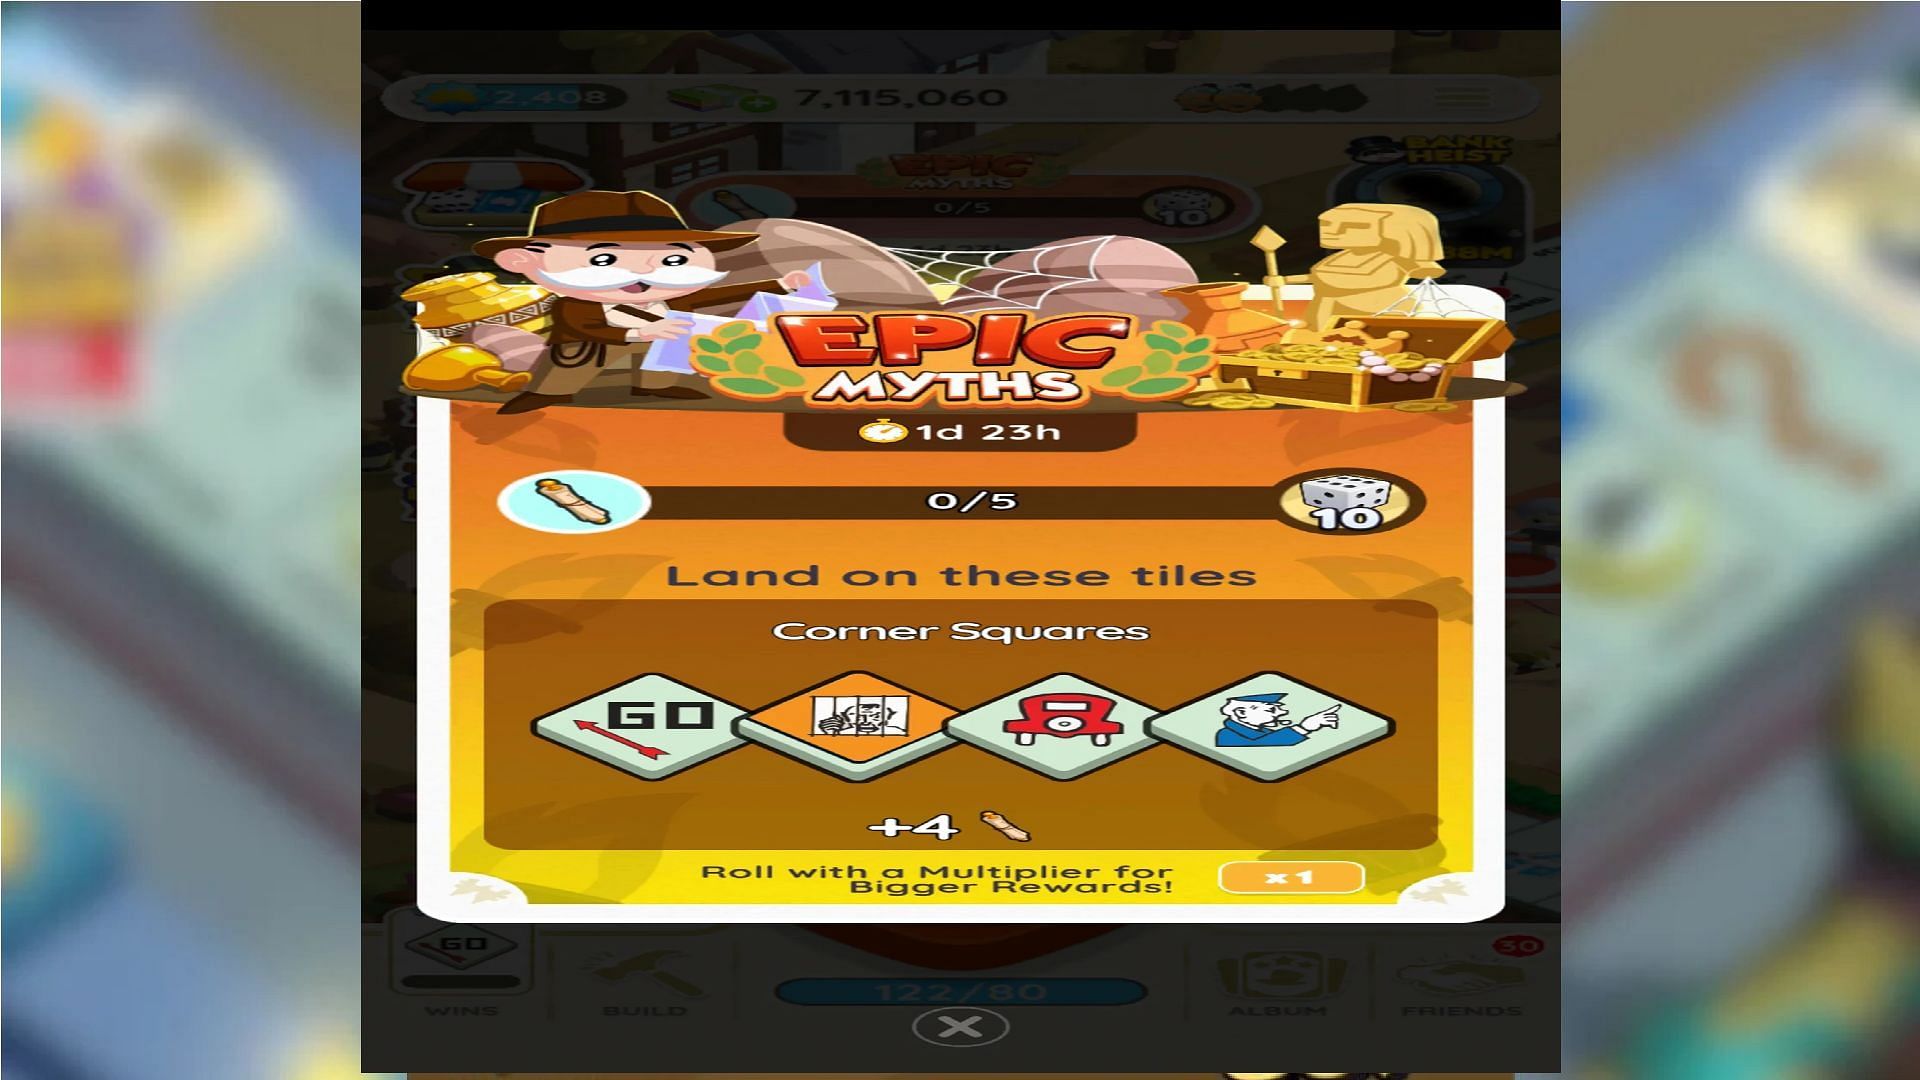 Tips to win more in the Epic Myths event in Monopoly GO (Image via Scopely)